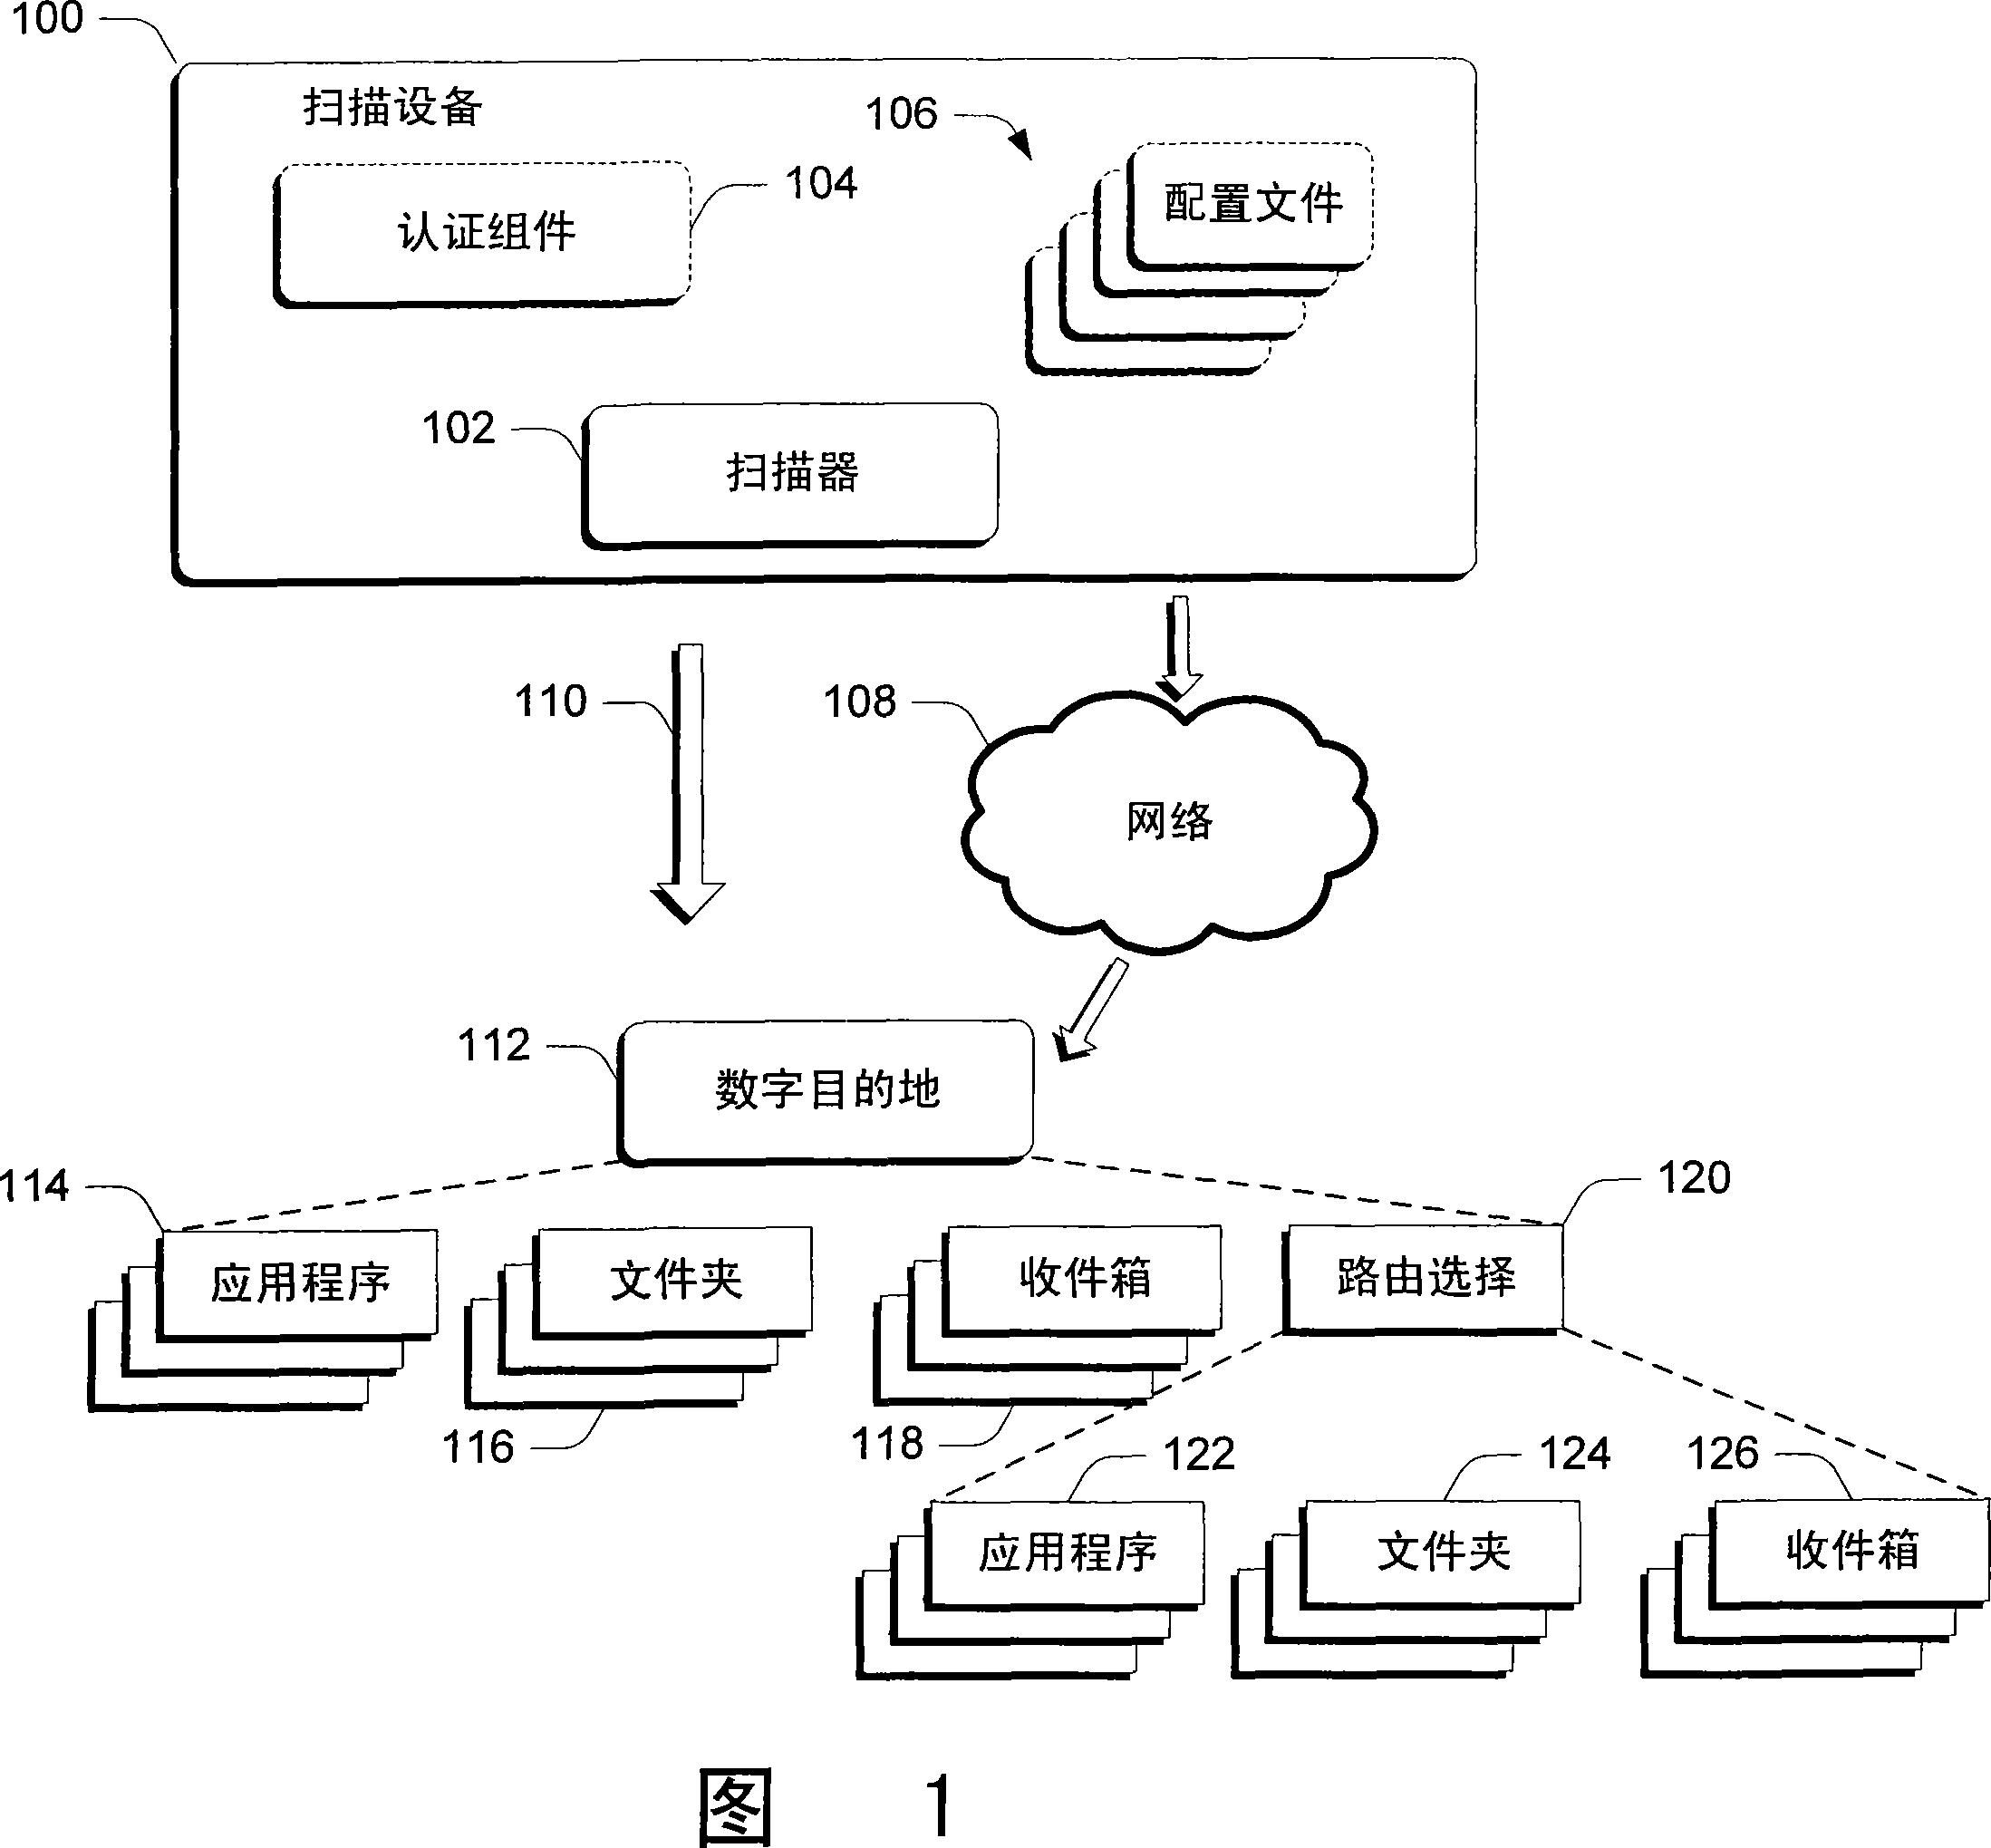 Scanning systems and methods